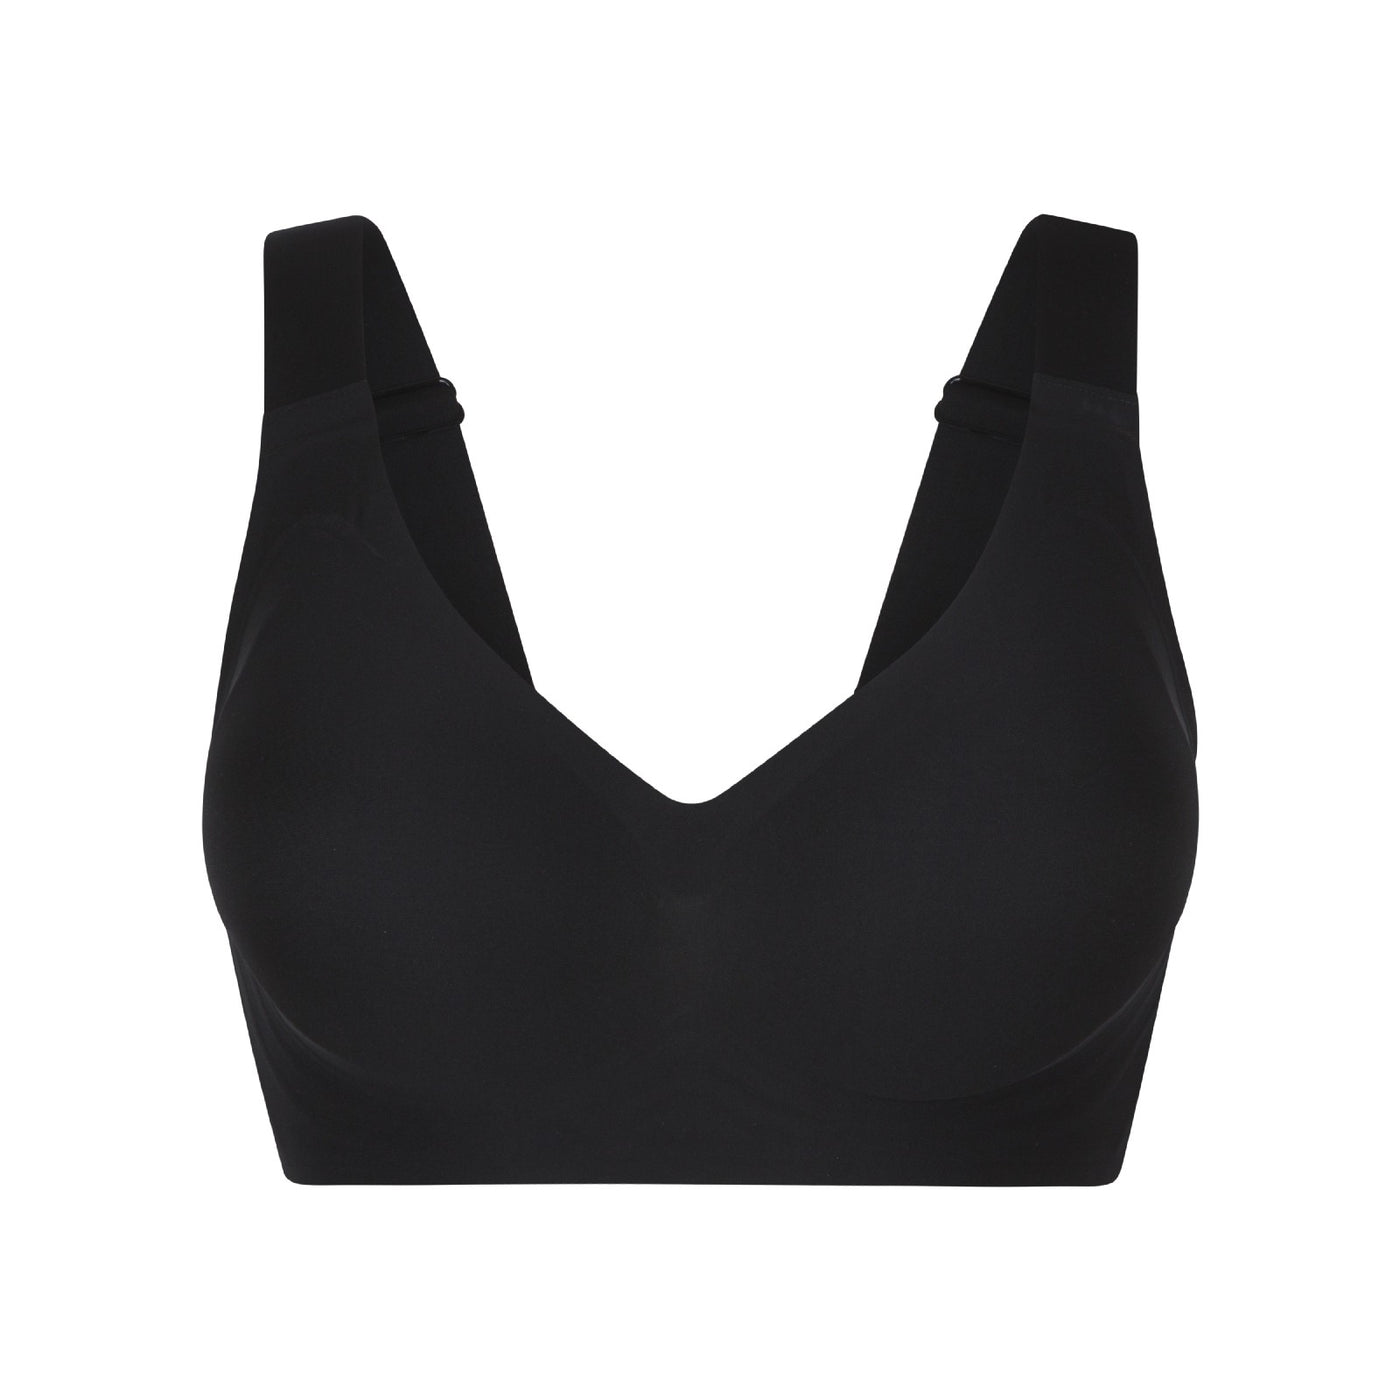 Lingadore Invisible Padded Soft Bra Black